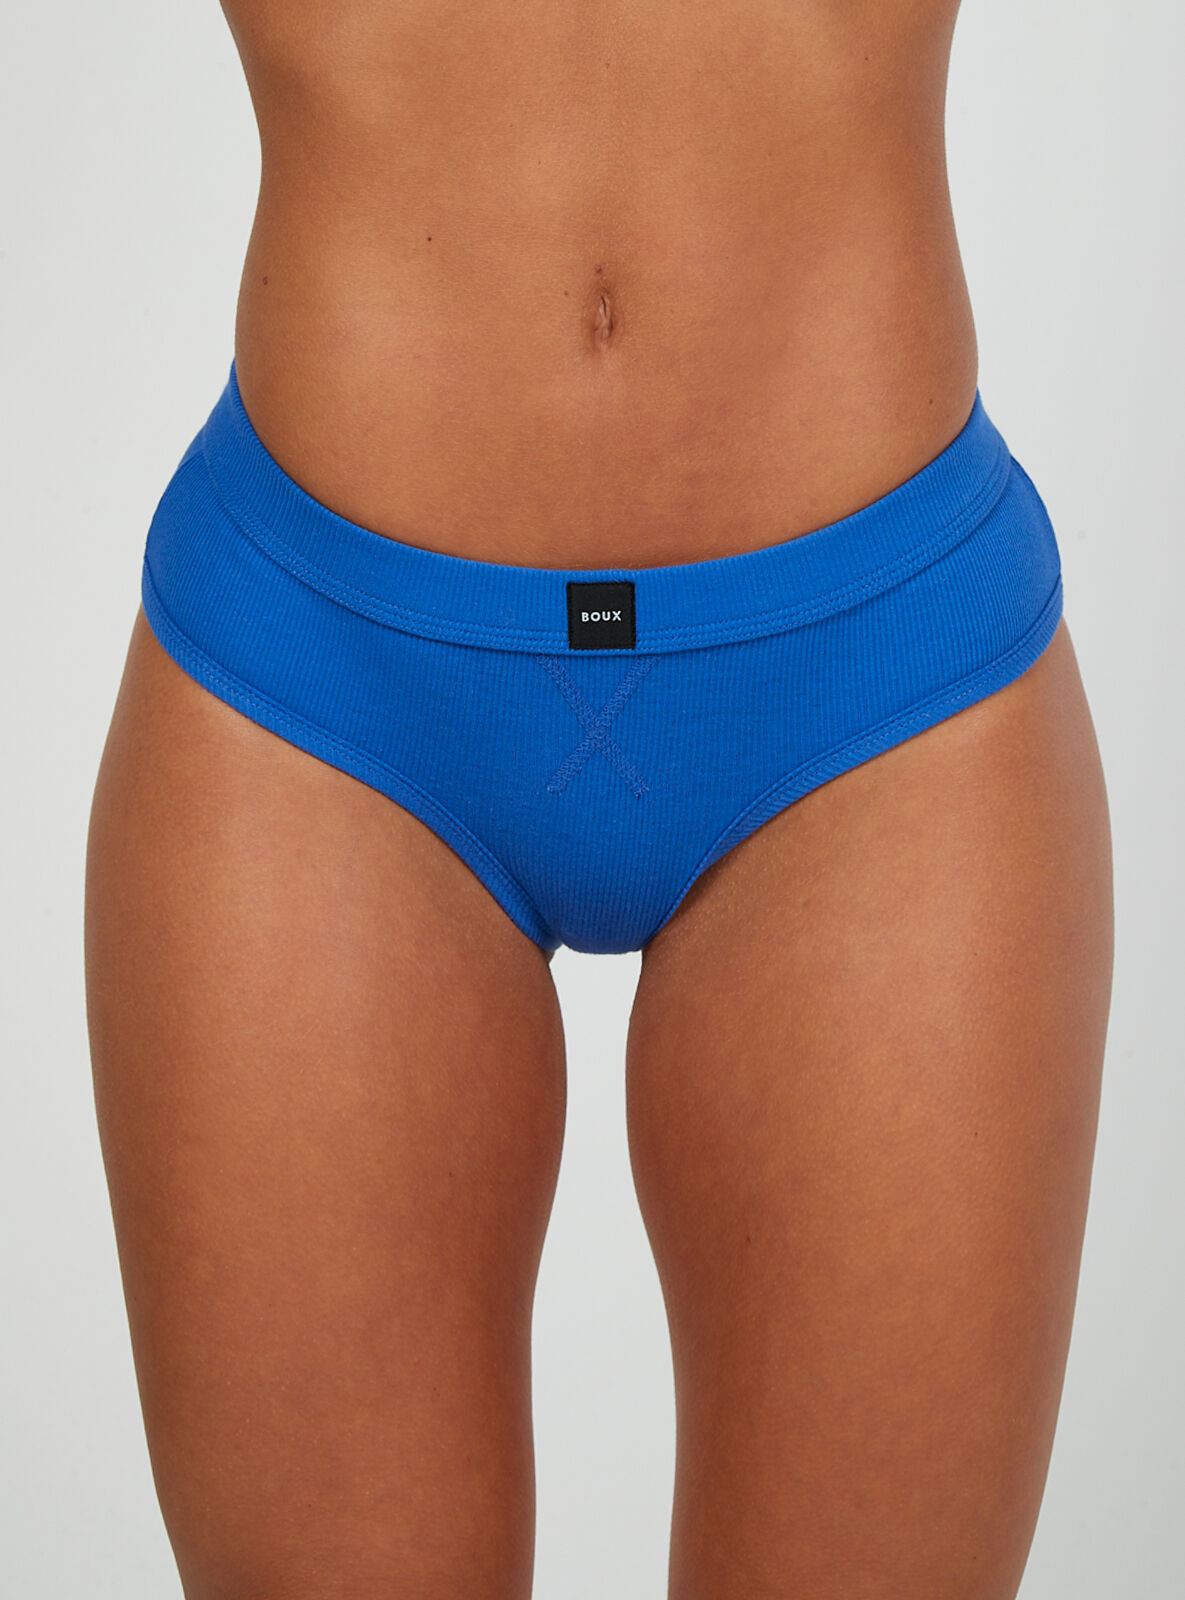 Boux Avenue Nell ribbed cheeky shorts - Cobalt Blue - 06